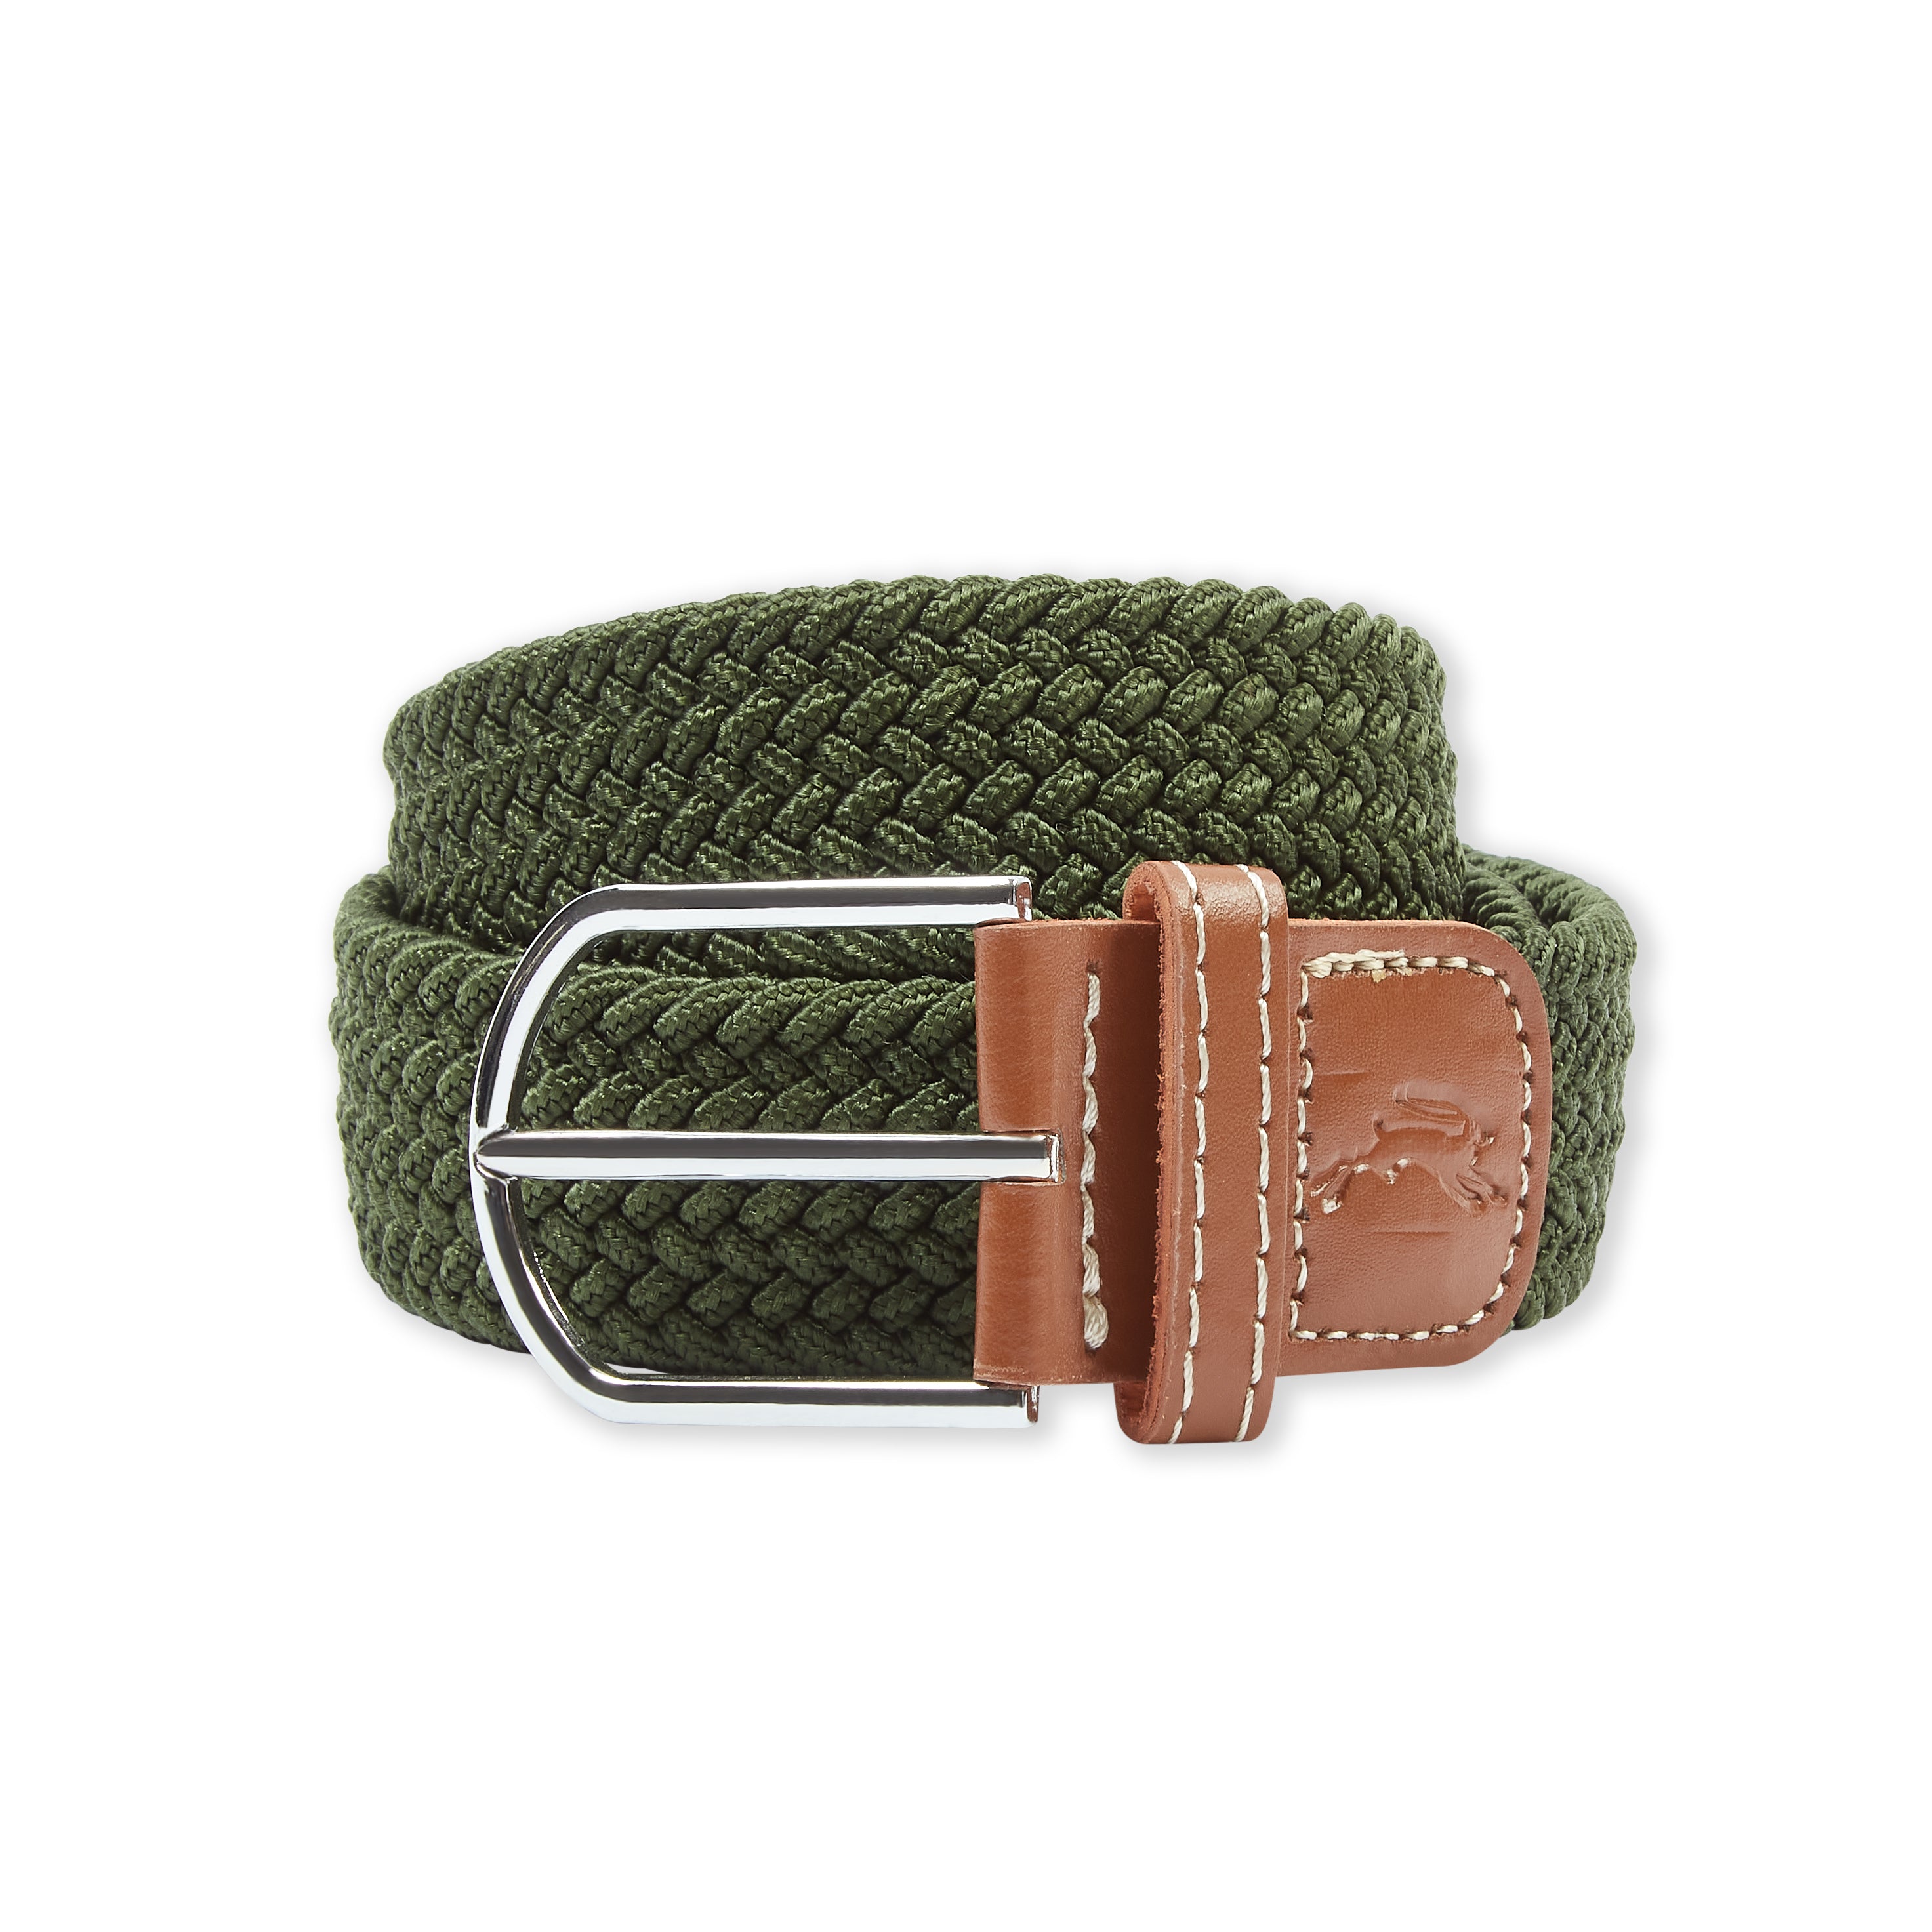 Burrows & Hare  One Size Woven Belt Green